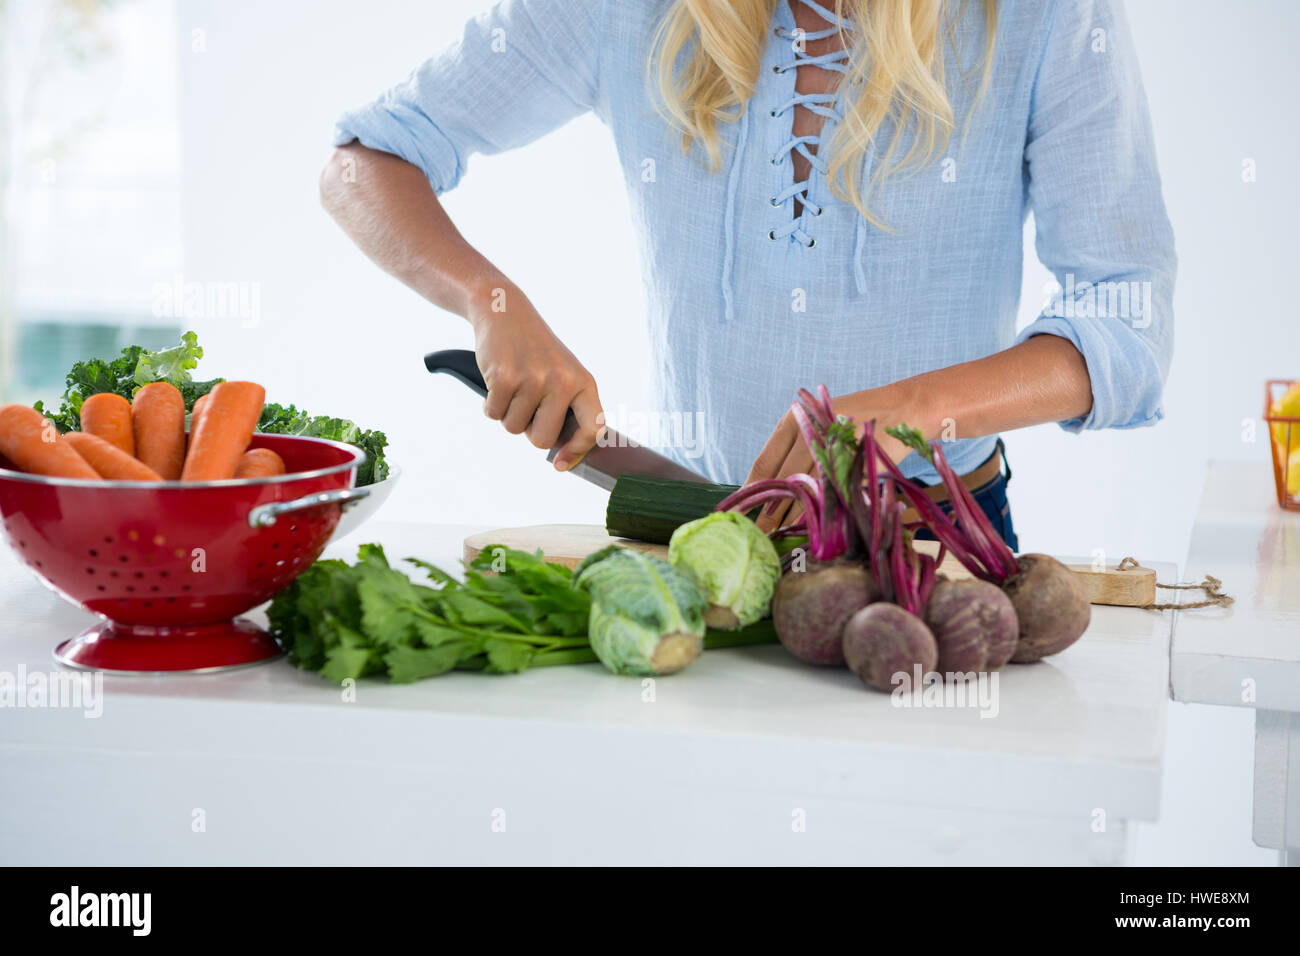 Mid-section of woman cutting vegetables on chopping board against white background Stock Photo